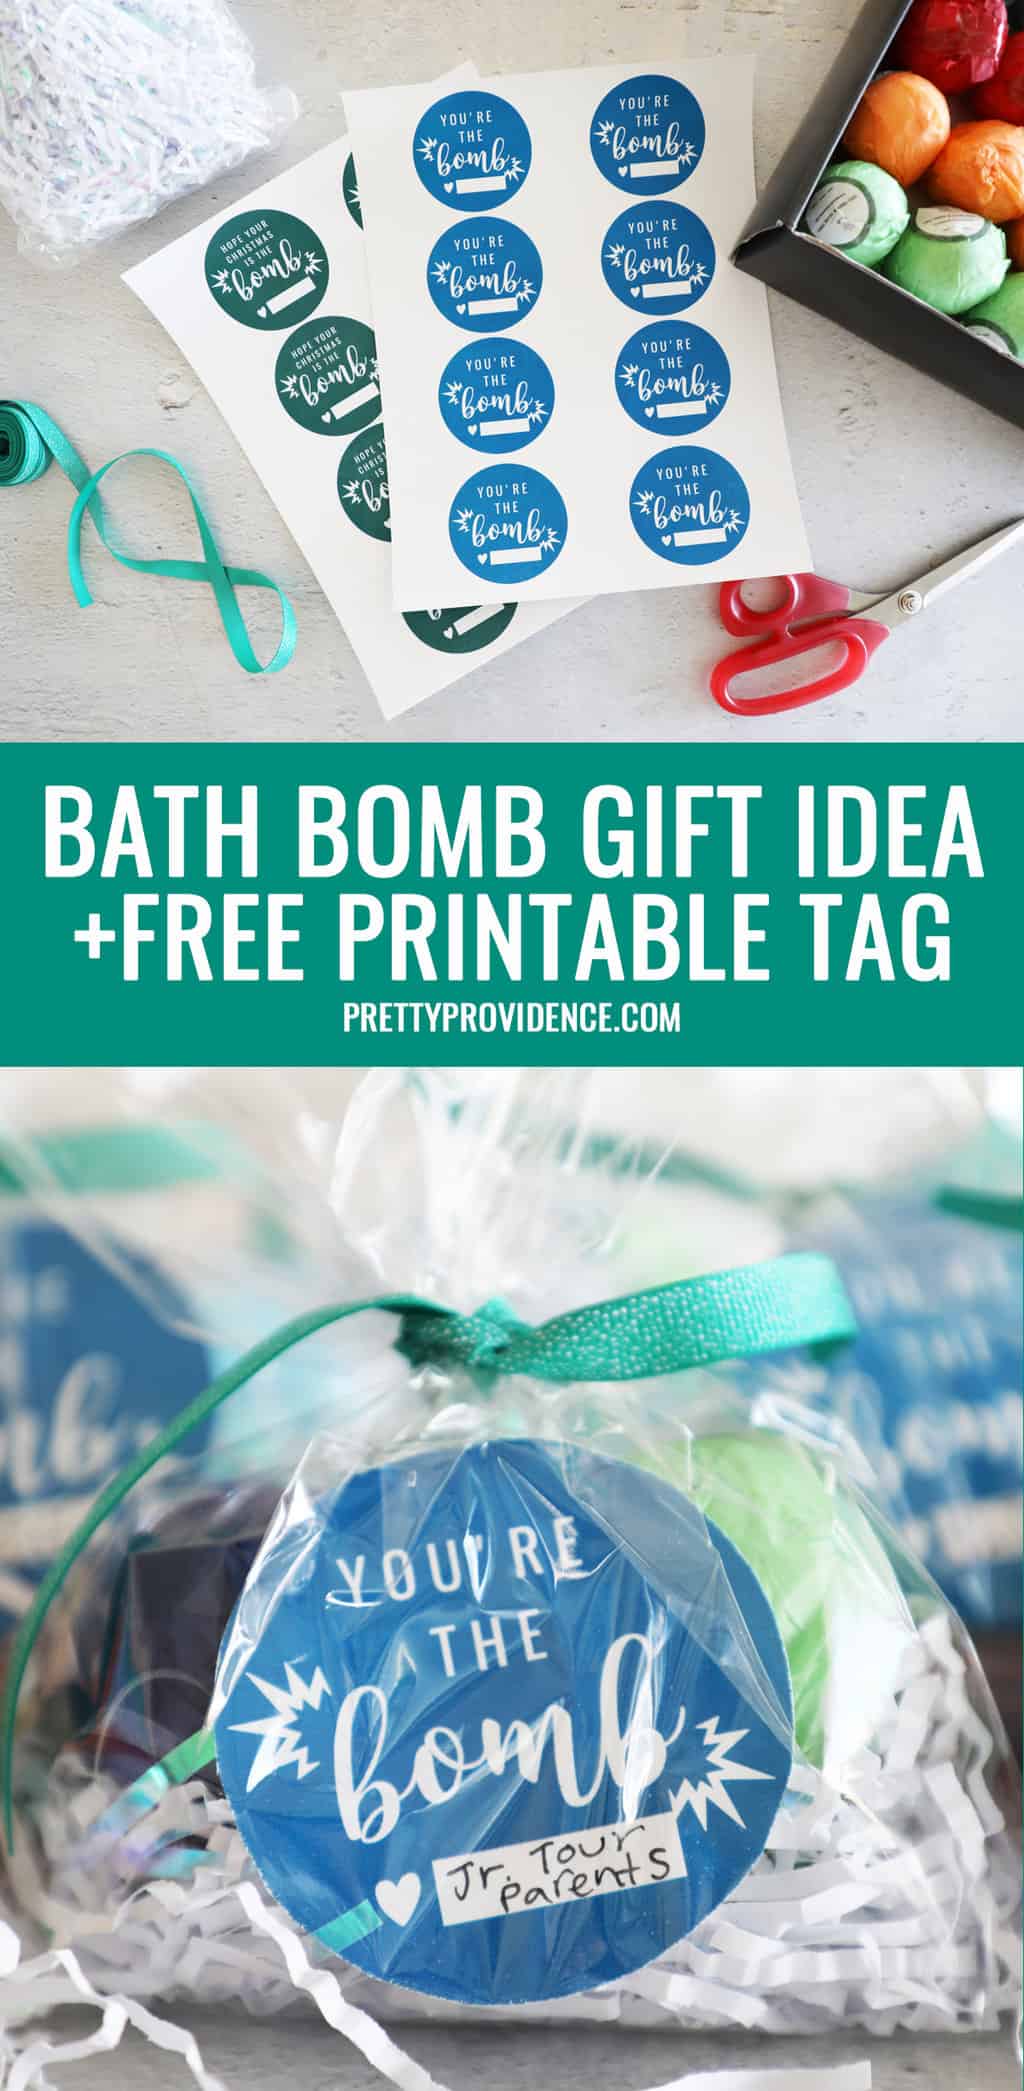 Bath Bomb Gifts with Free Printable Tags